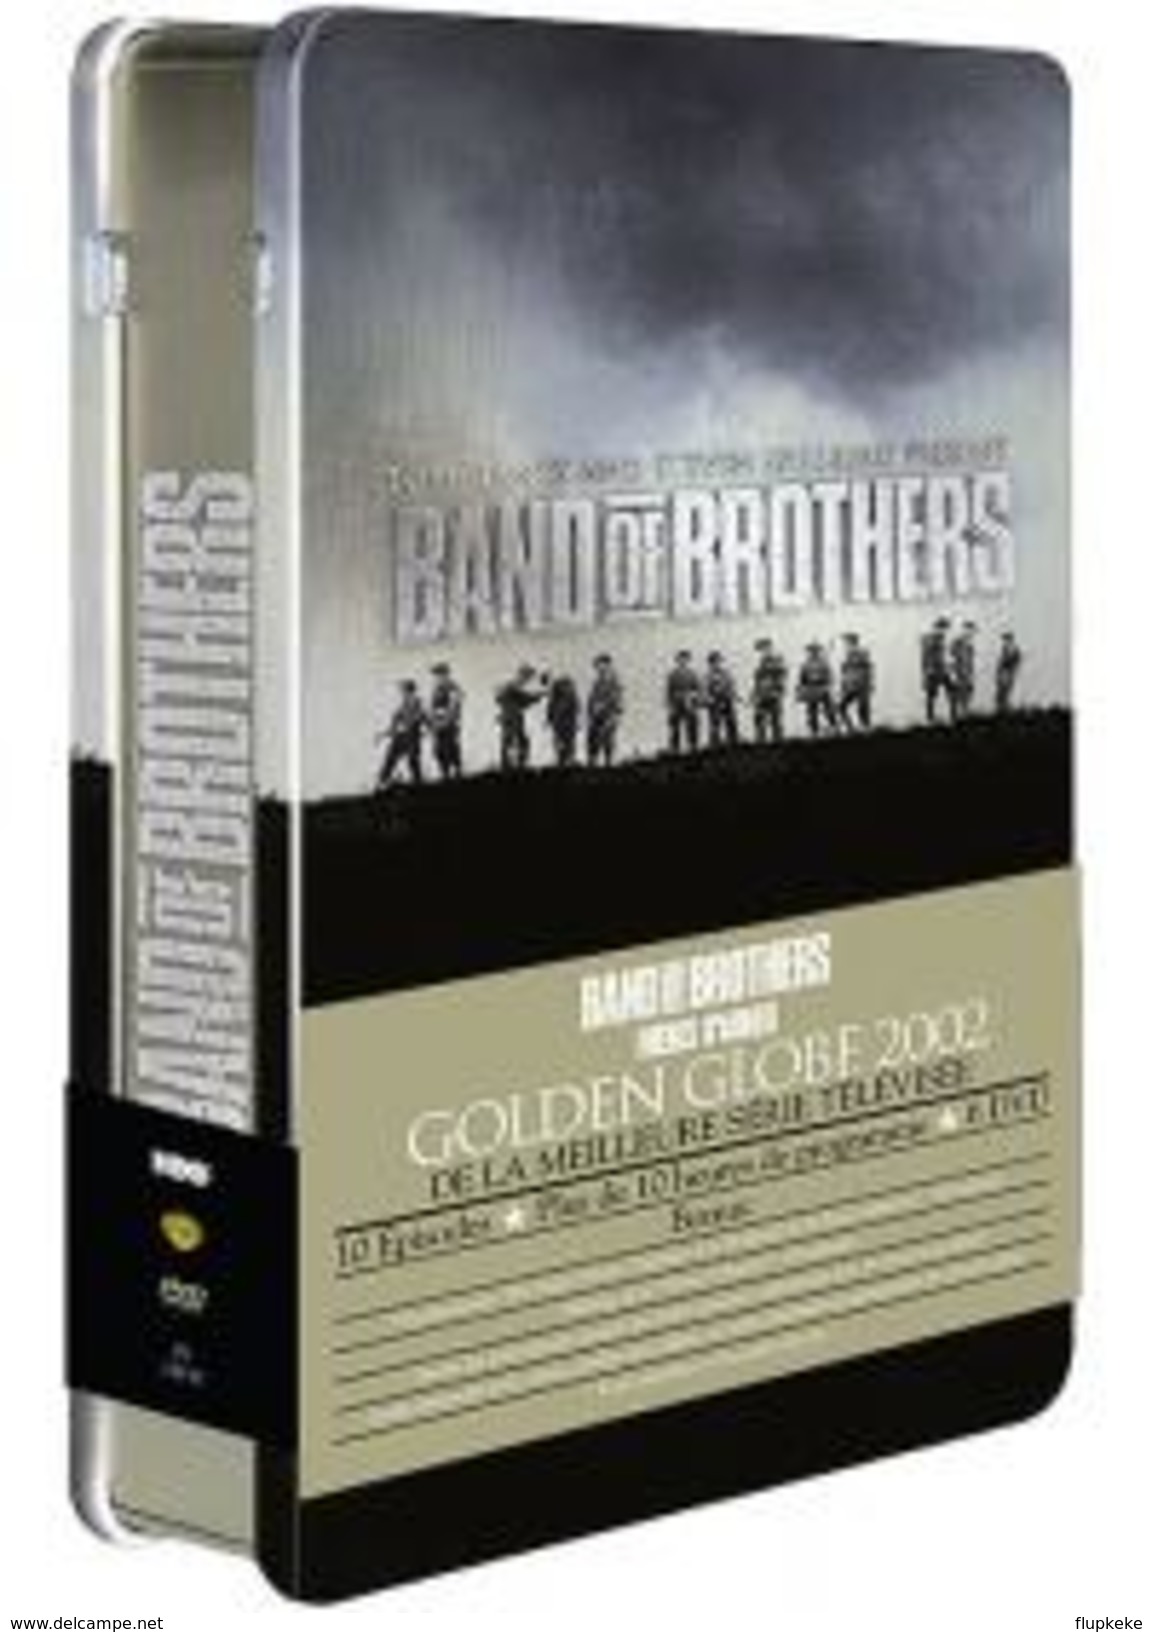 Dvd Zone 2 Frères D'armes (2001) Édition Collector Limitée Band Of Brothers Vf+Vostfr - Geschiedenis